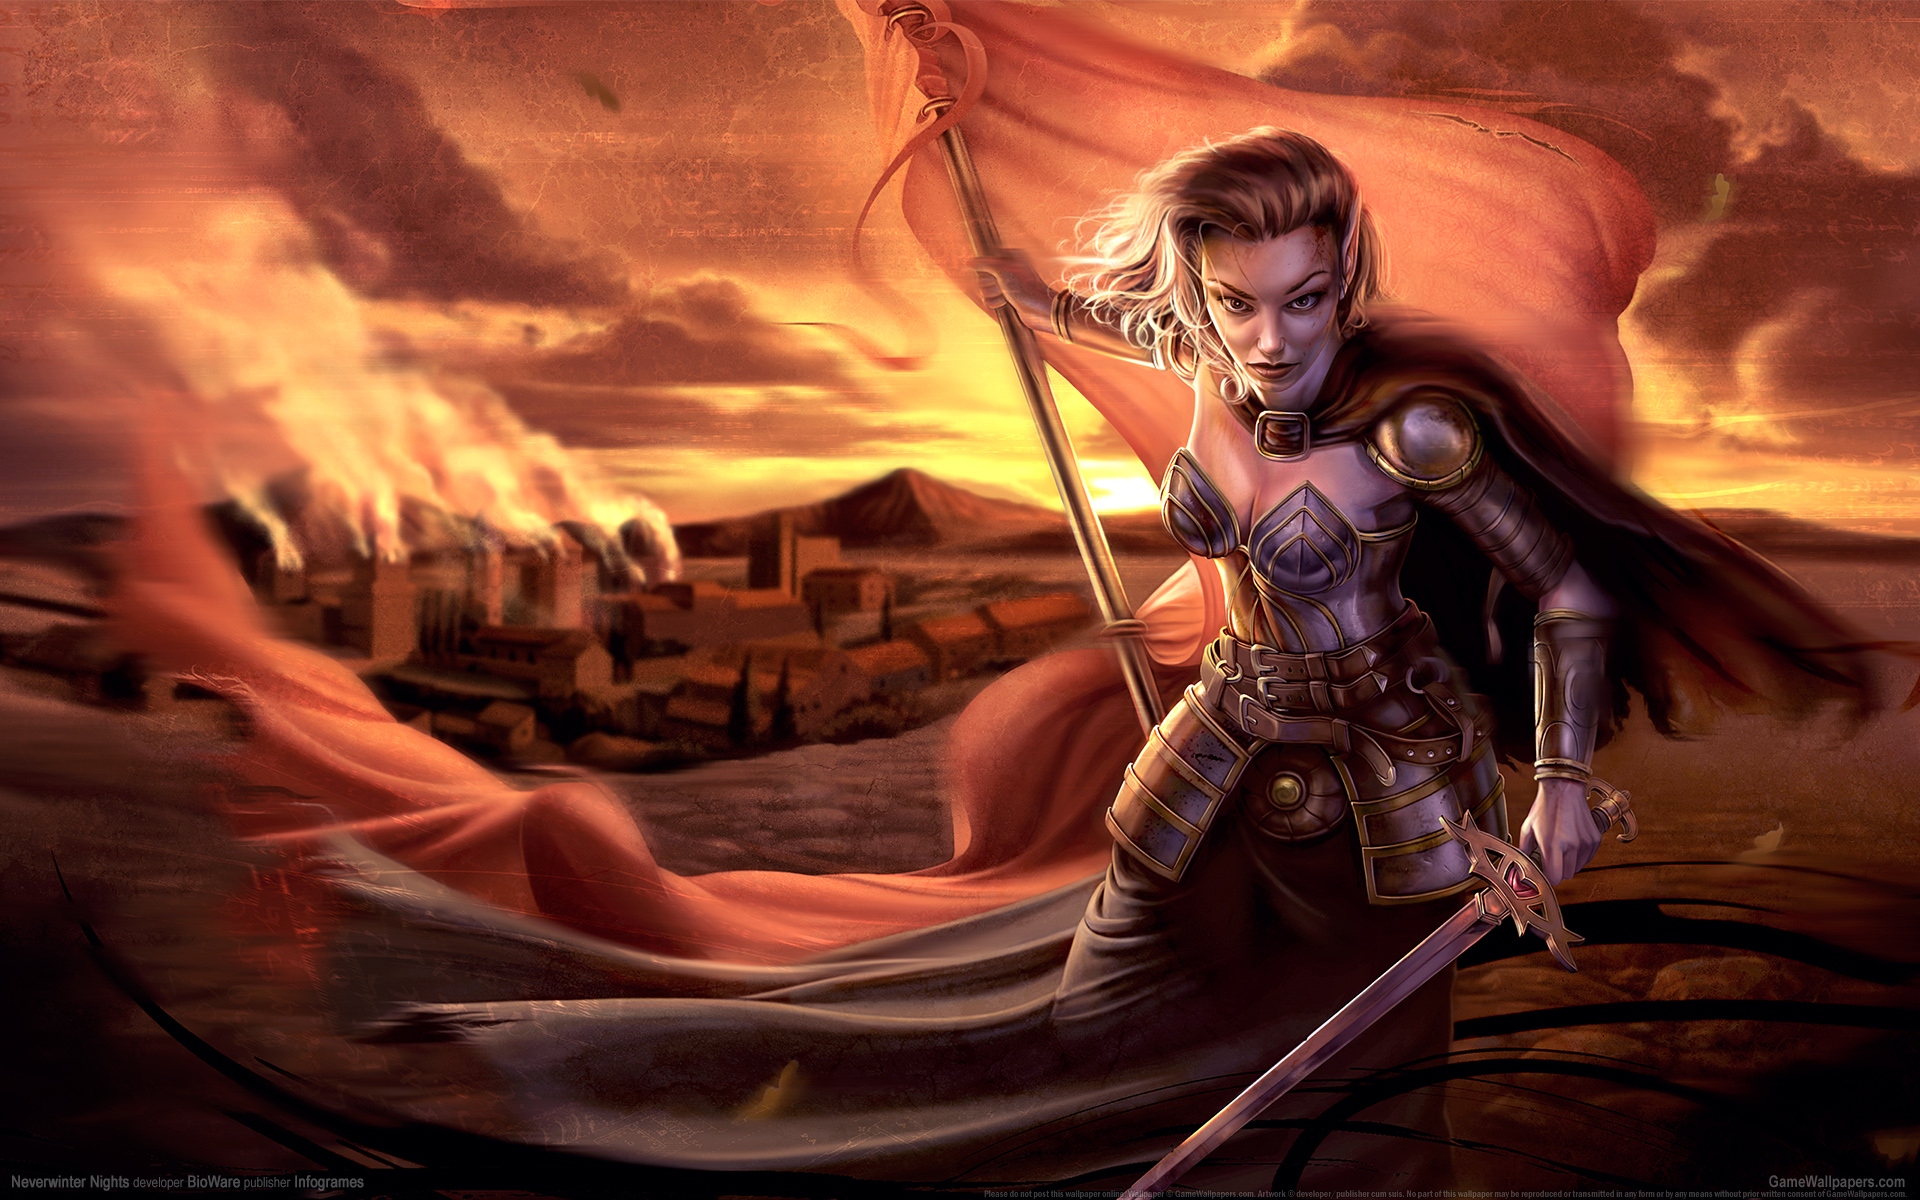 Neverwinter Nights 1920x1200 wallpaper or background 11